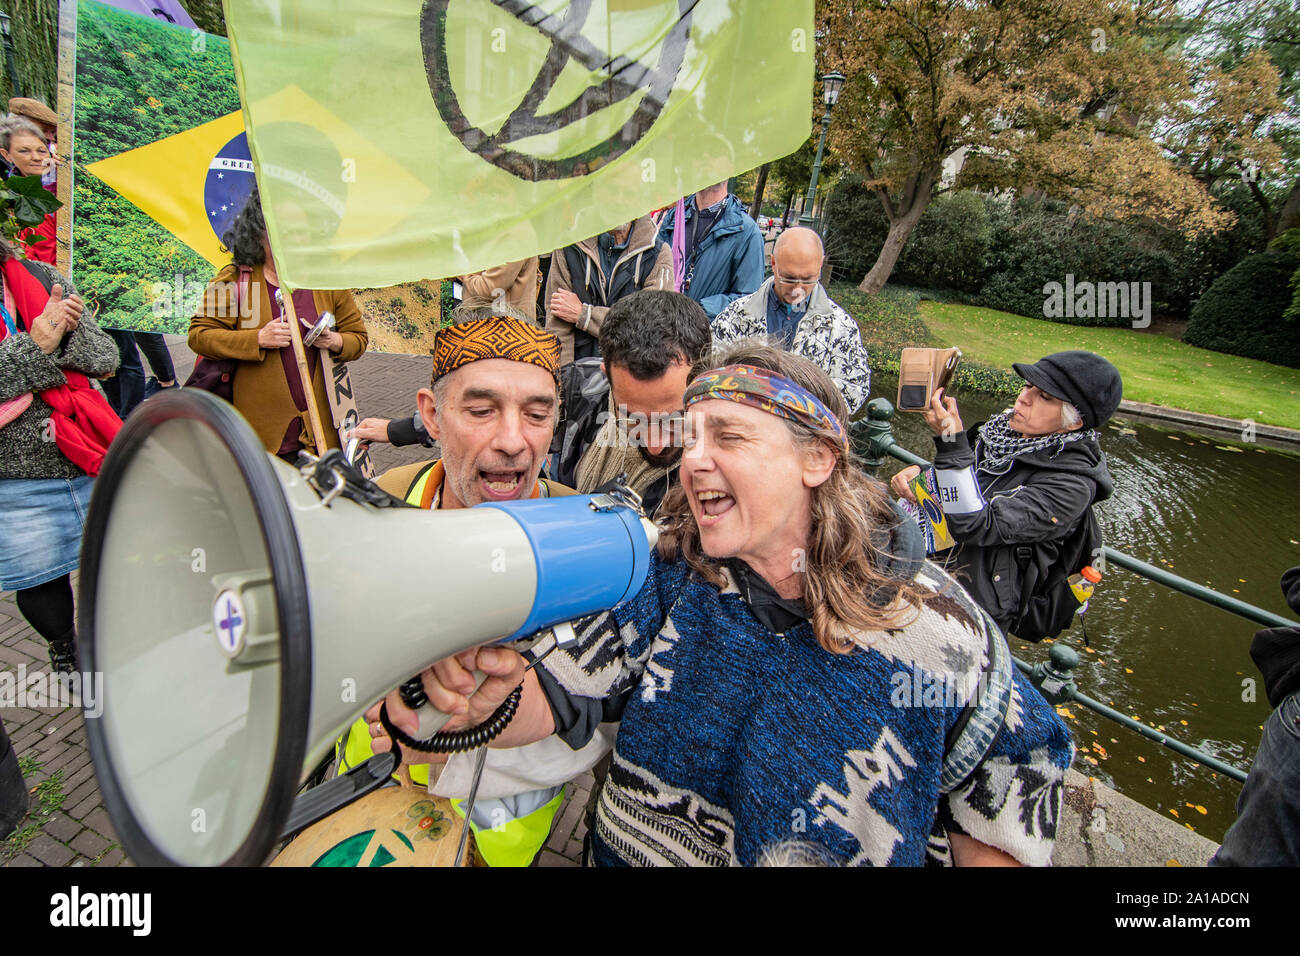 Den Haag, Netherlands. 25th Sep, 2019. DEN HAAG, 25-09-2019, Demonstration against cutting down threes at the Amazone rainforest in Brazil. Credit: Pro Shots/Alamy Live News Stock Photo